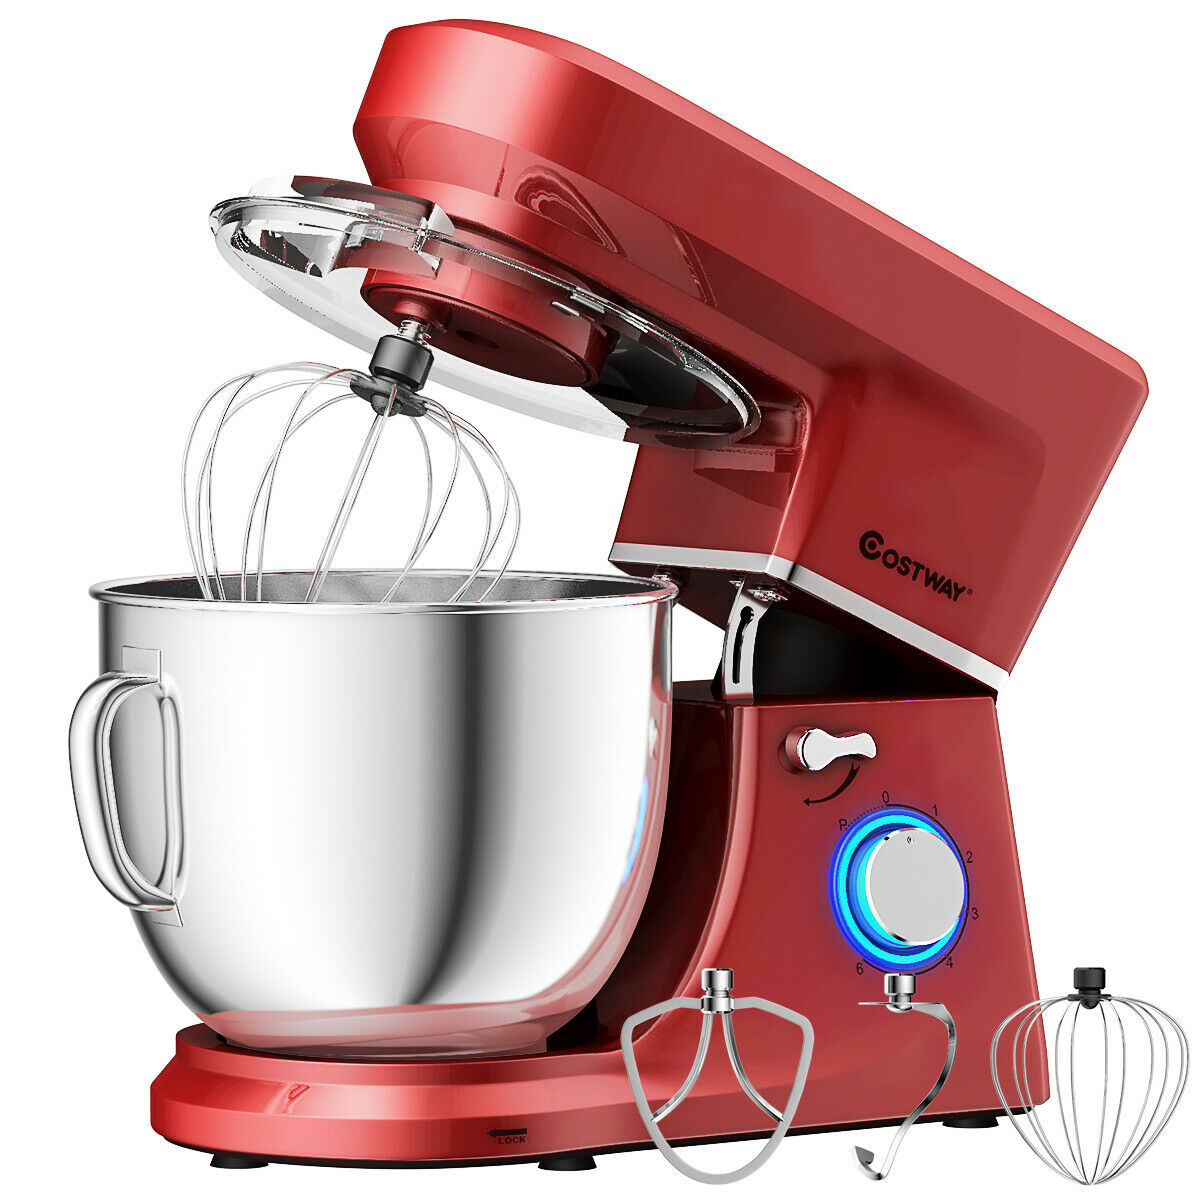 Costway Tilt-Head Stand Mixer 7.5 Qt 6 Speed 660W with Dough Hook, Whisk & Beater Red - image 1 of 10